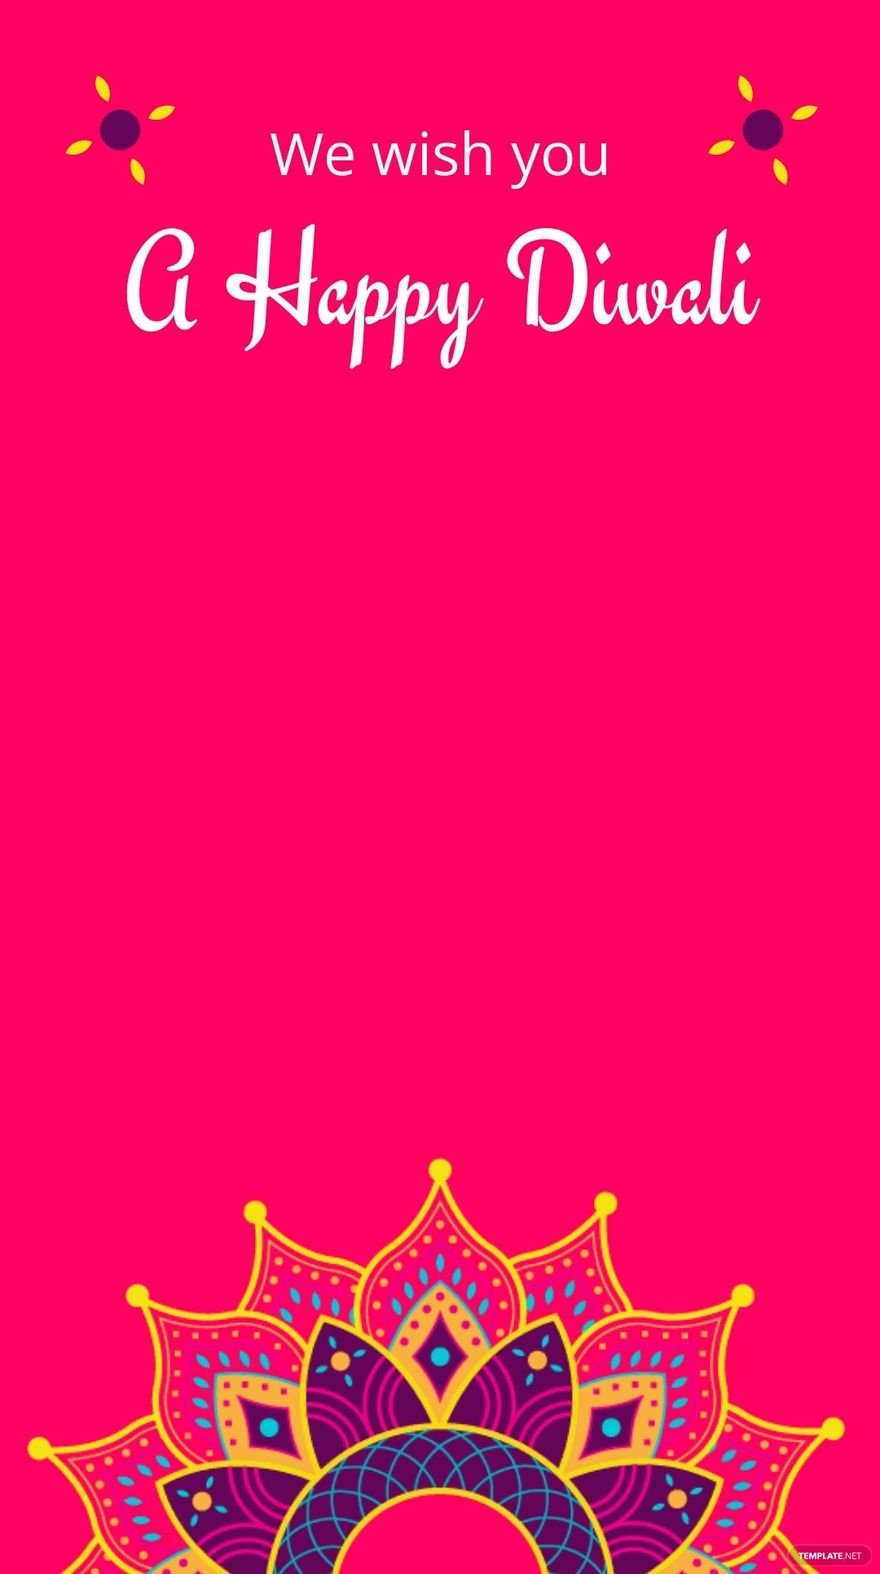 Colorful Diwali Wishes Snapchat Geofilter Template